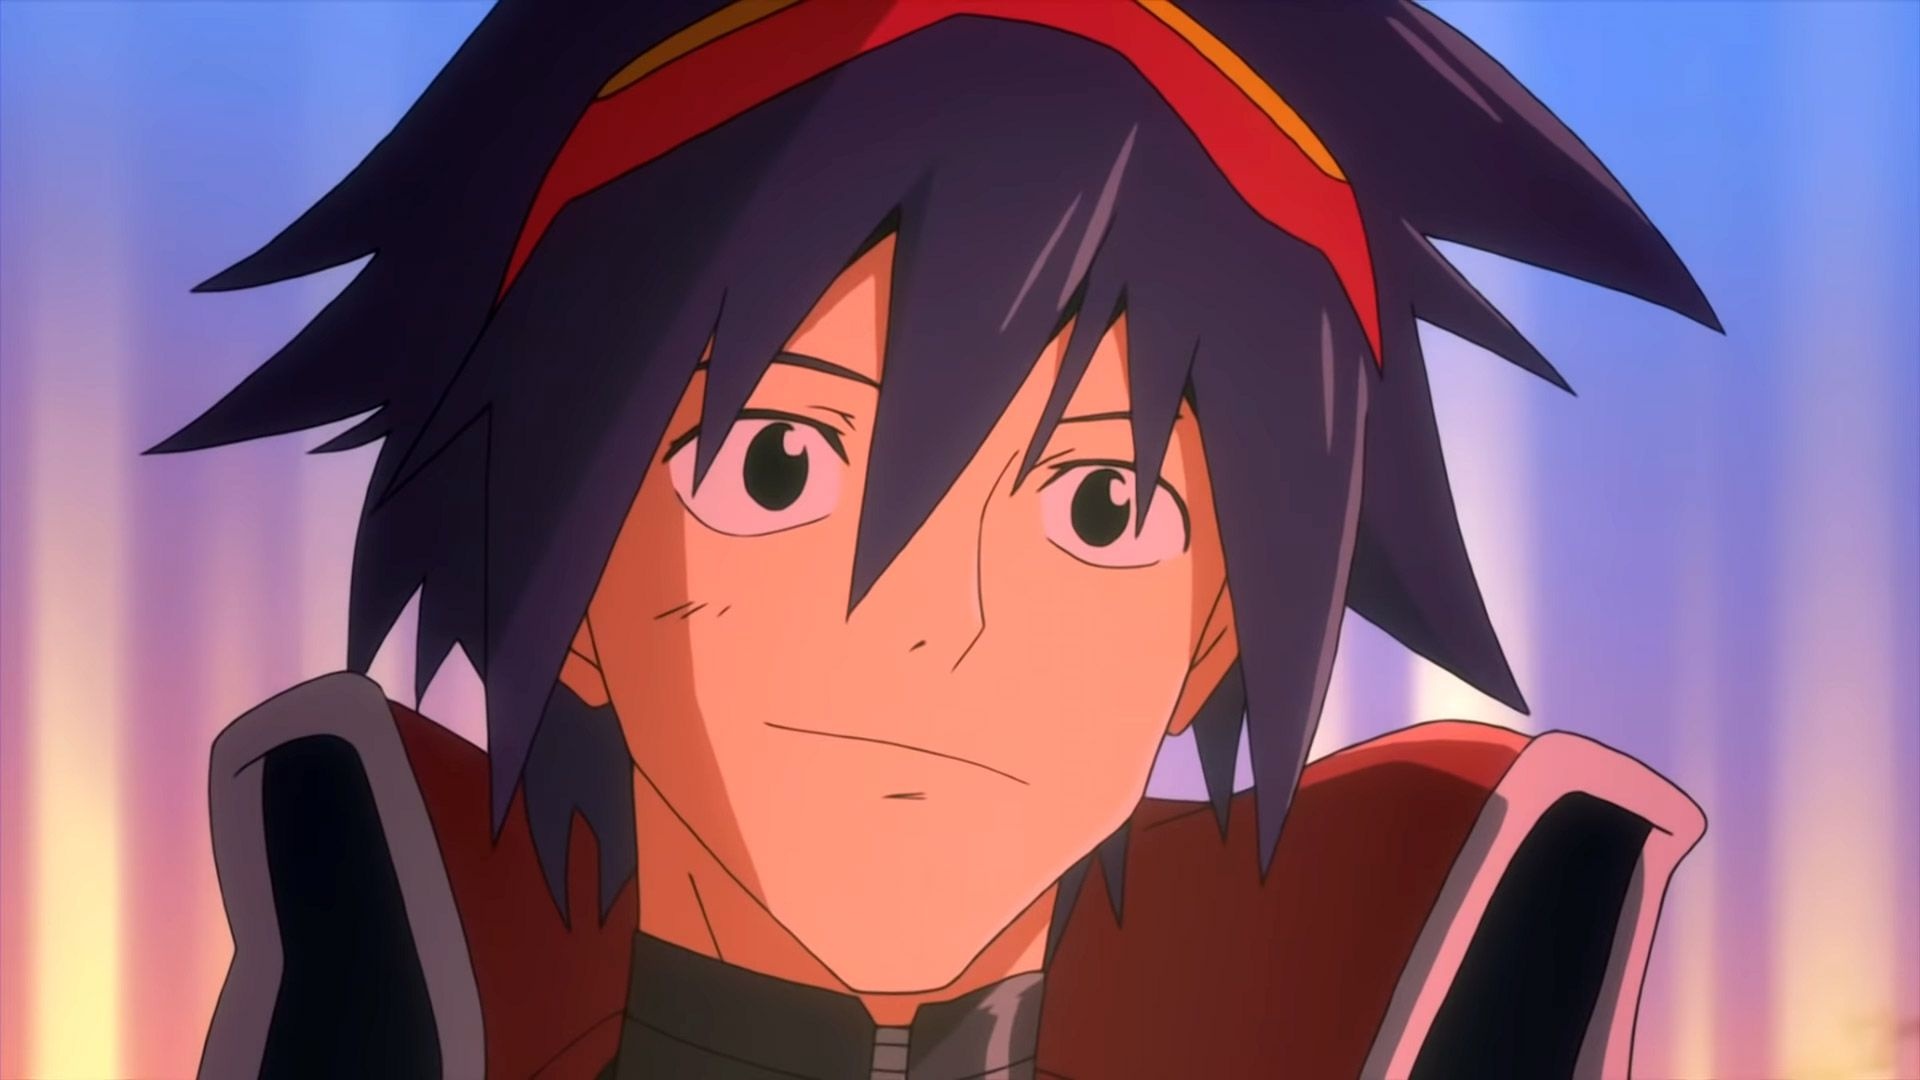 Top 10 famous quotes of Simon from anime Gurren Lagann - Anime Rankers 1920x1080